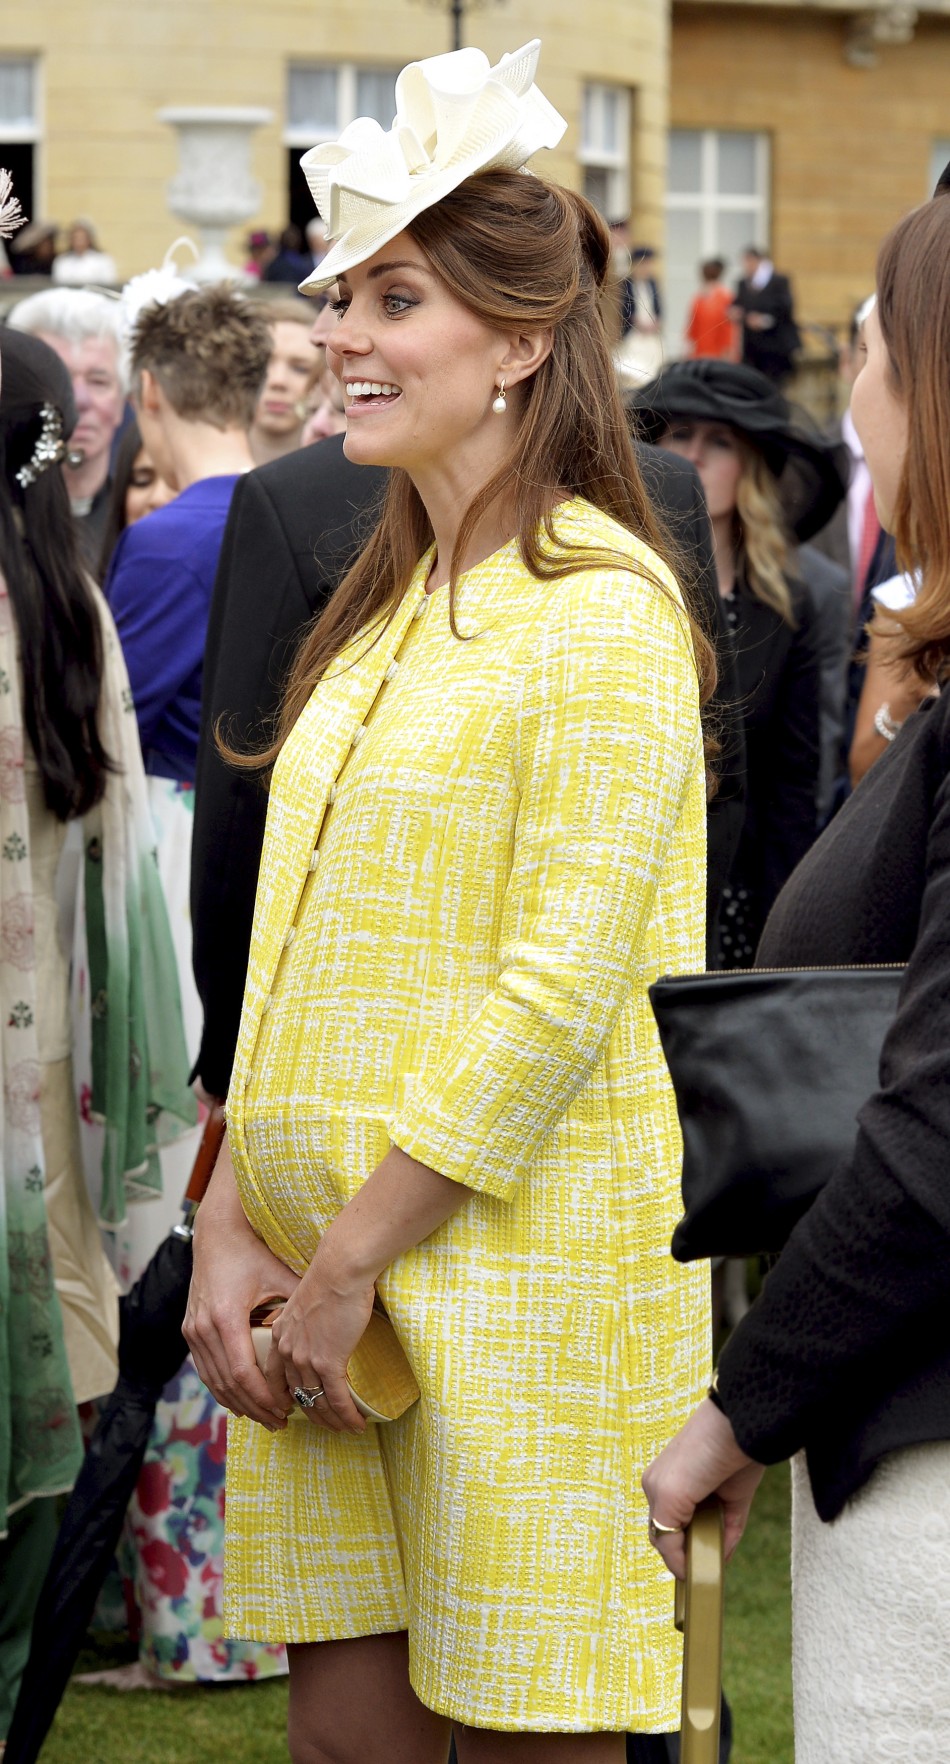 Duchess of Cambridge attends a garden party at Buckingham Palace in London May 22, 2013.